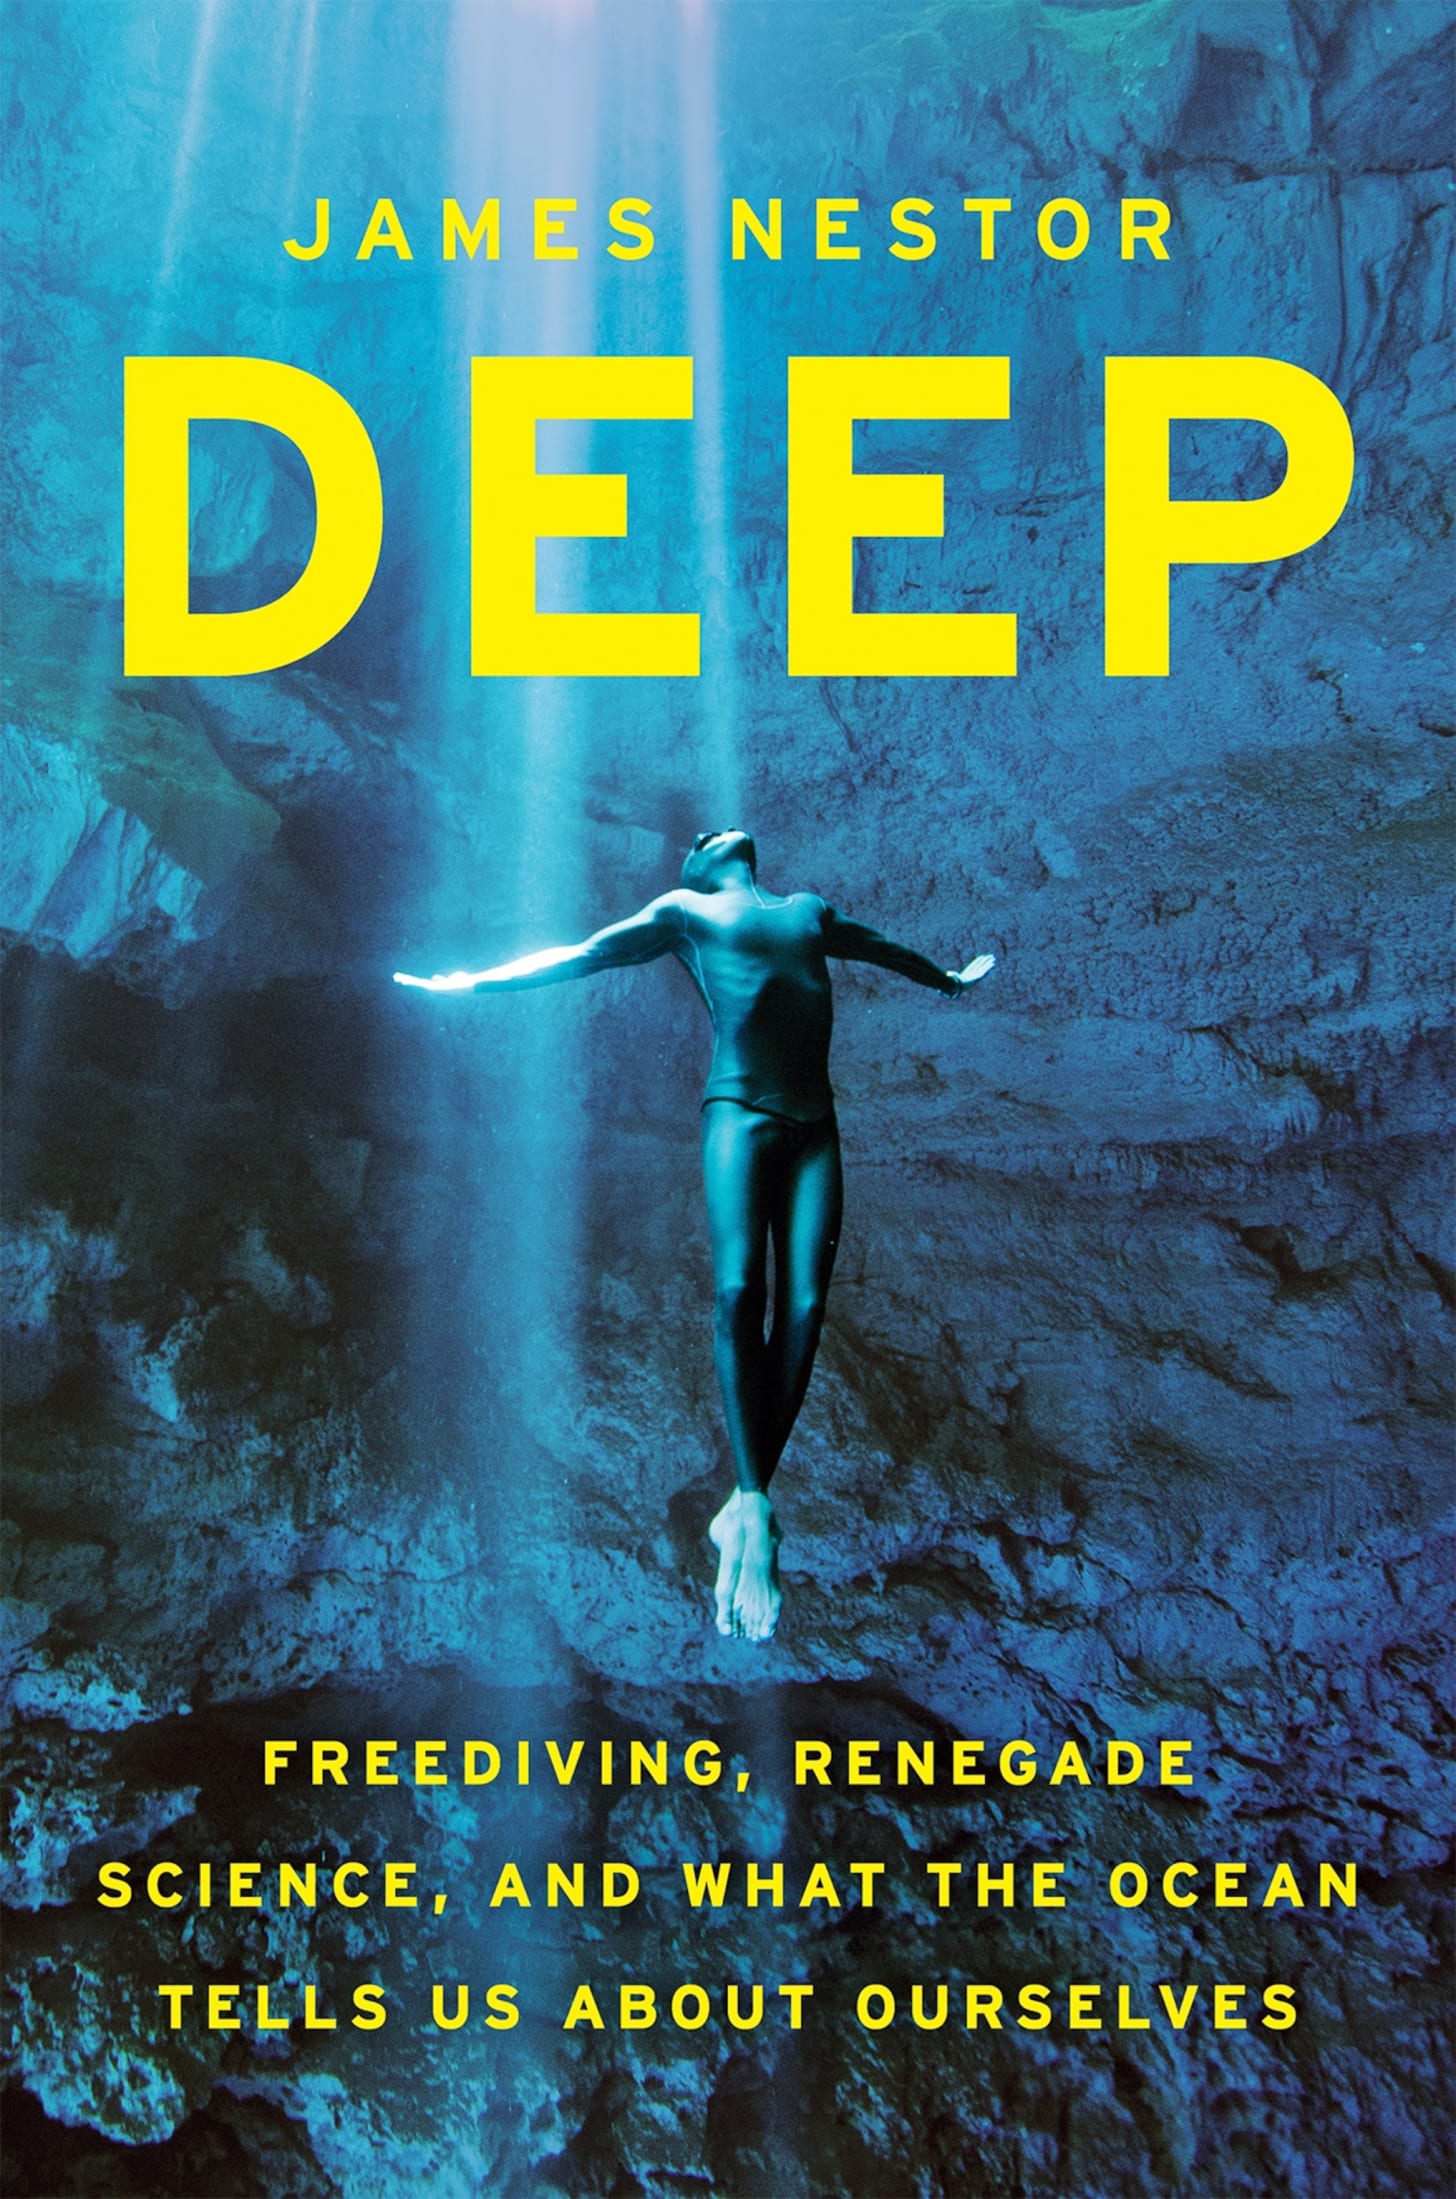 Free Diving World Record Will Soon Be Pushed to 1,000 Feet, Author Says